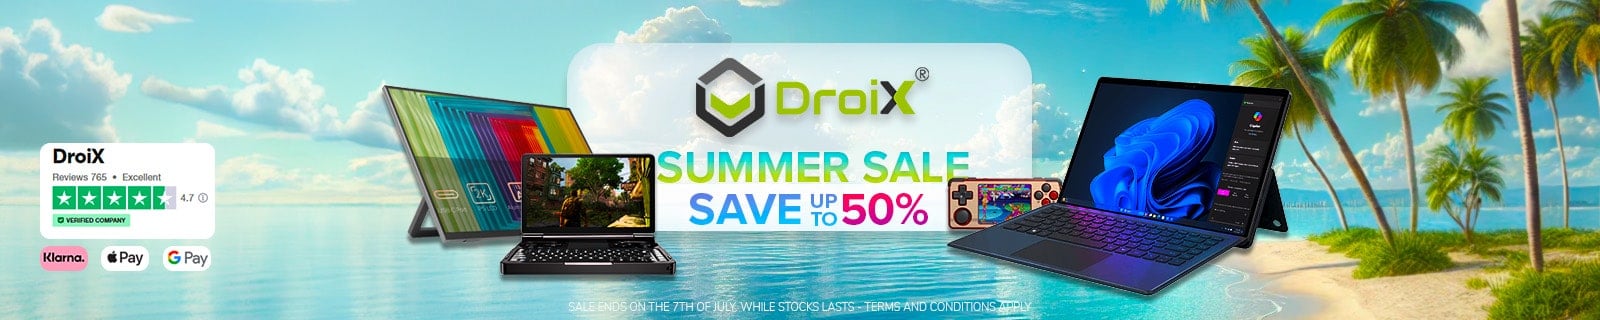 Banner for DroiX Summer Sale: Up to 50% Off"